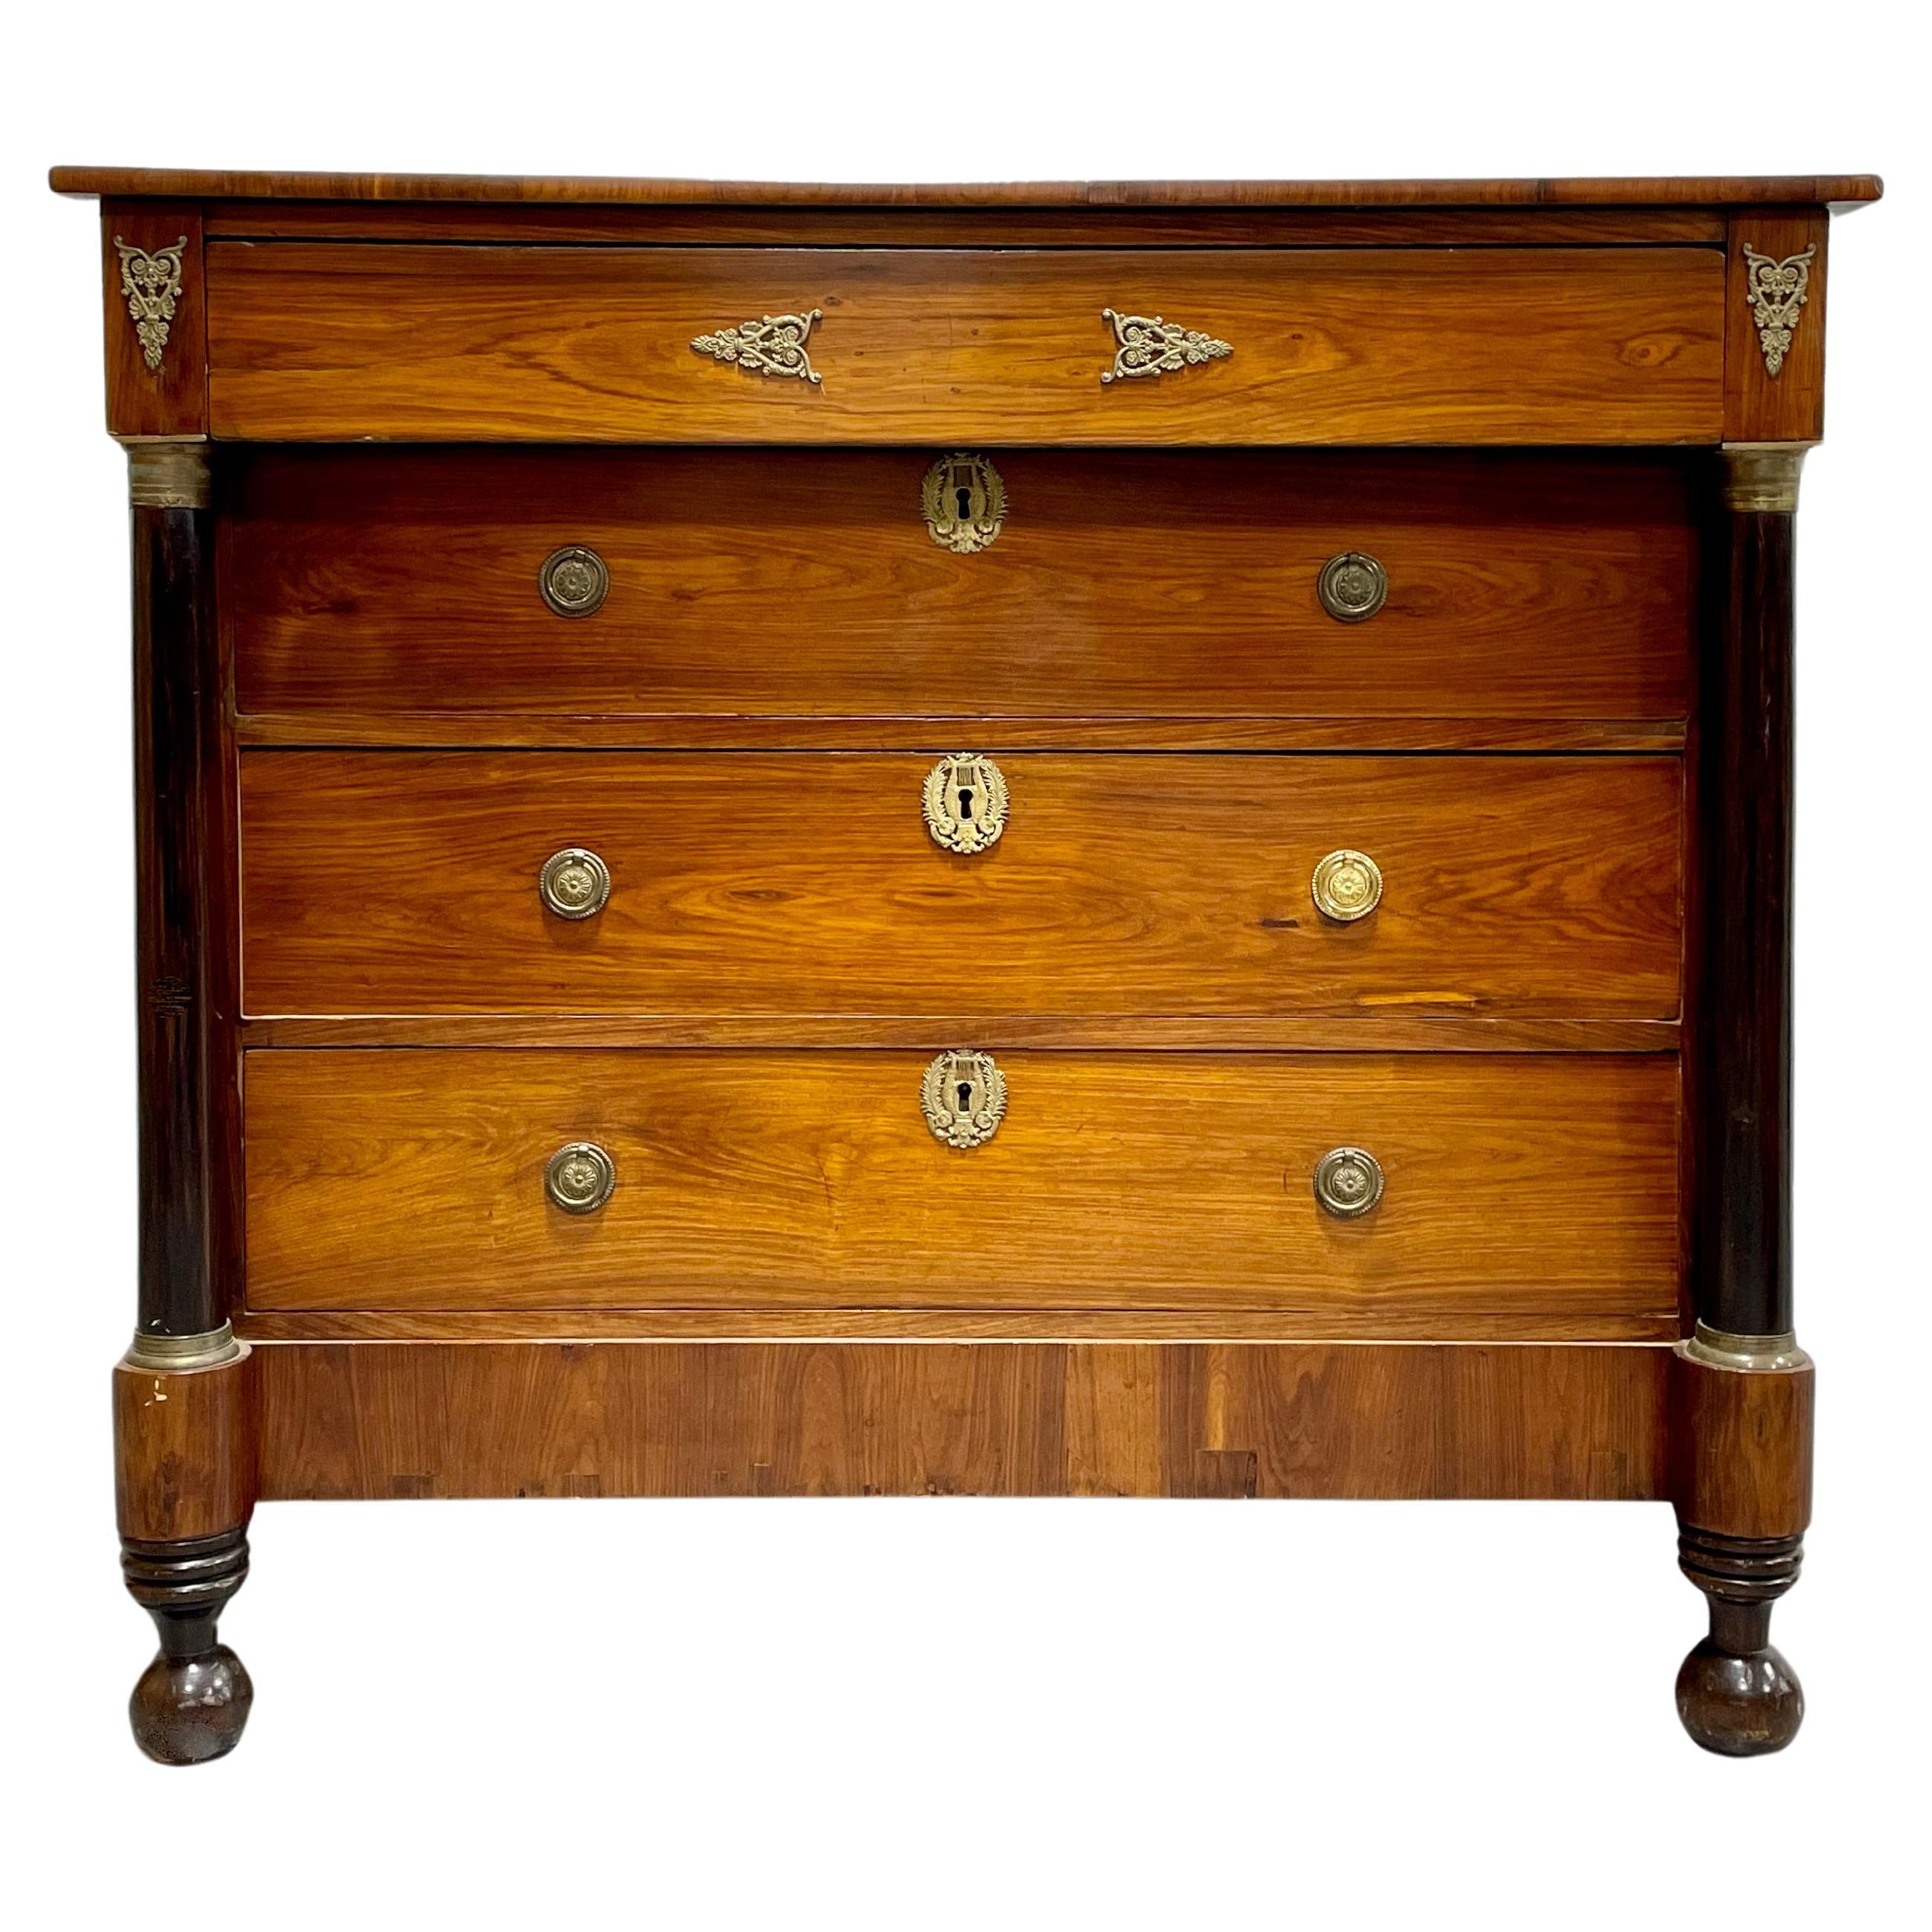 French First Empire Period Chest of Drawers / Commode / Dresser, c. 1810